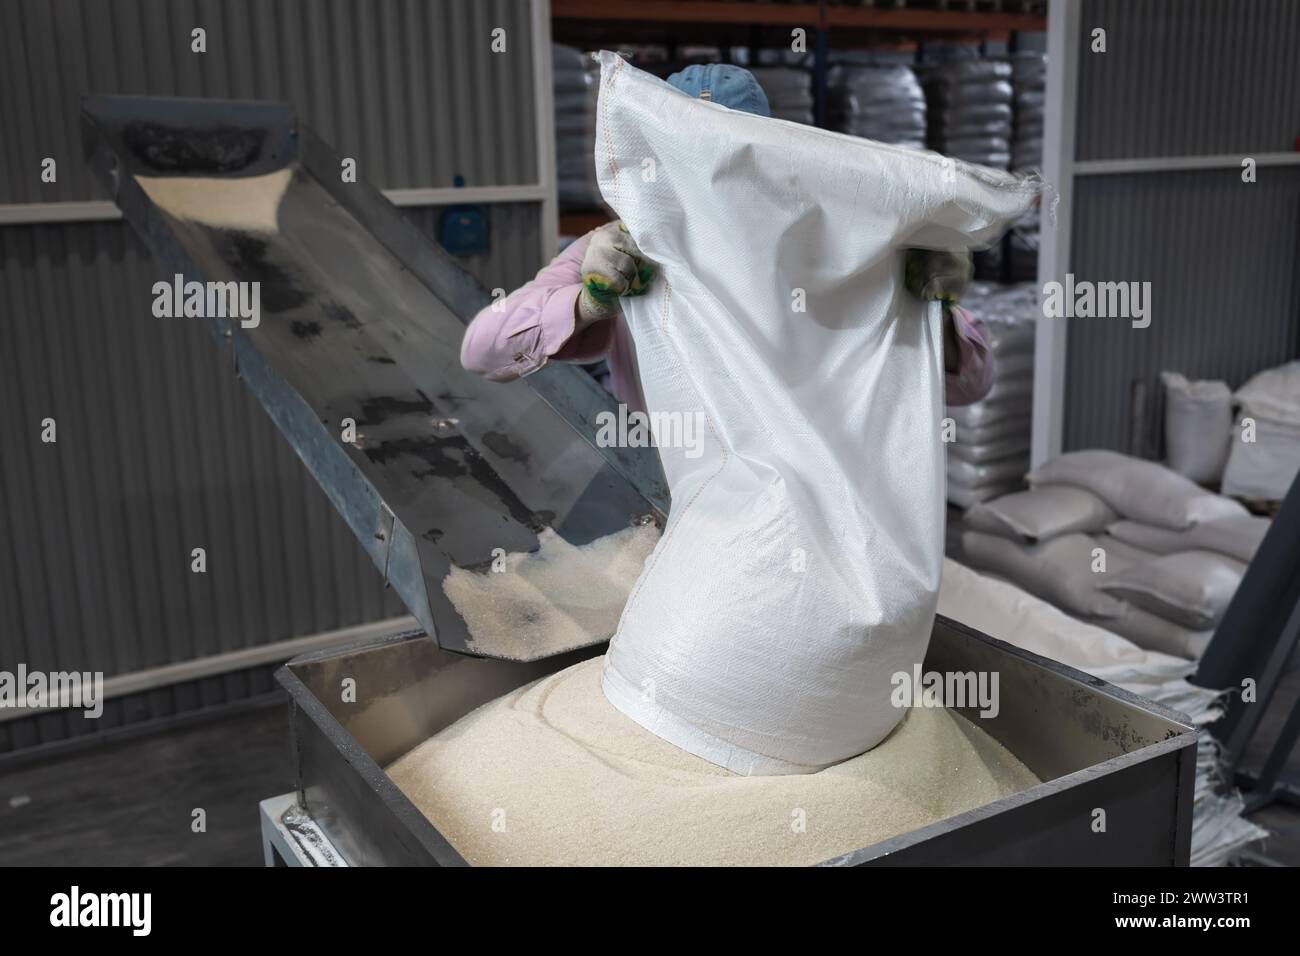 A worker at a manufacturing plant pours a bag of sugar onto a conveyor belt for further processing Stock Photo